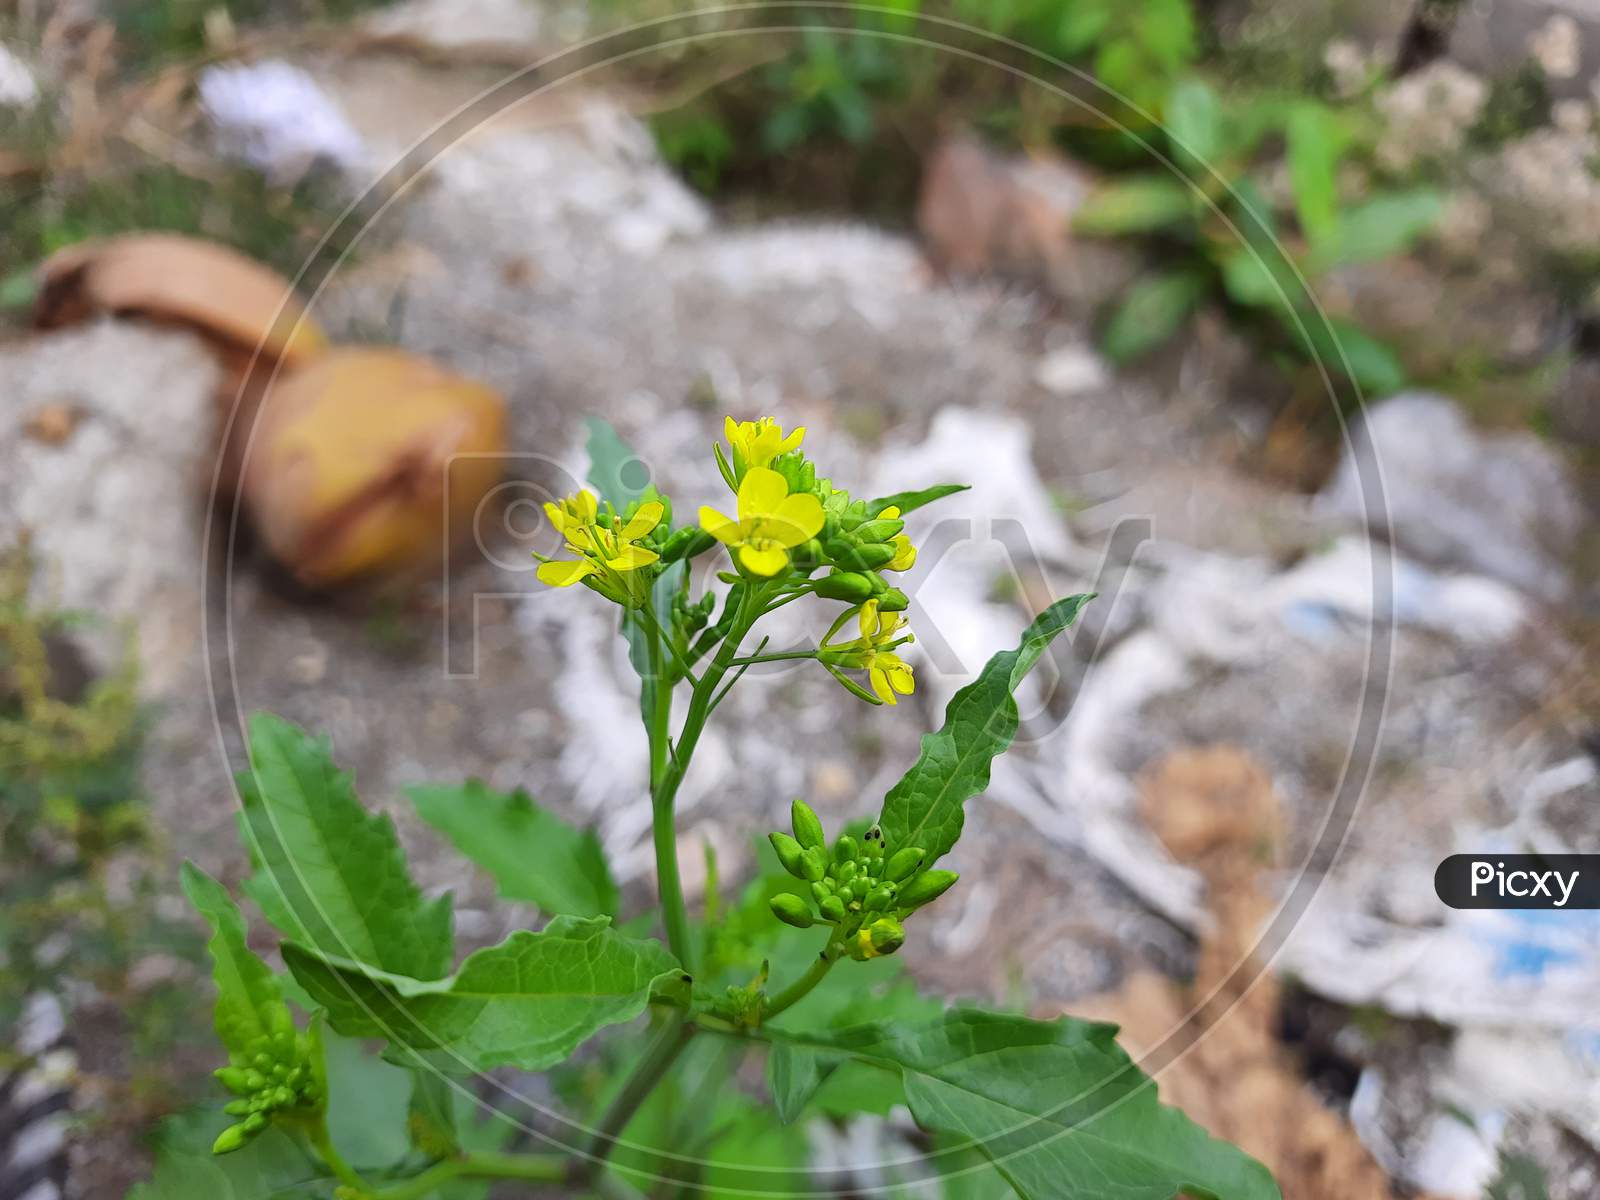 Beautiful Mustard flower Sinapis Aiba yellow flowers and plant in a nature Background. Hedge mustard or sisymbrium officinale is an old cultivation and medicinal plant.